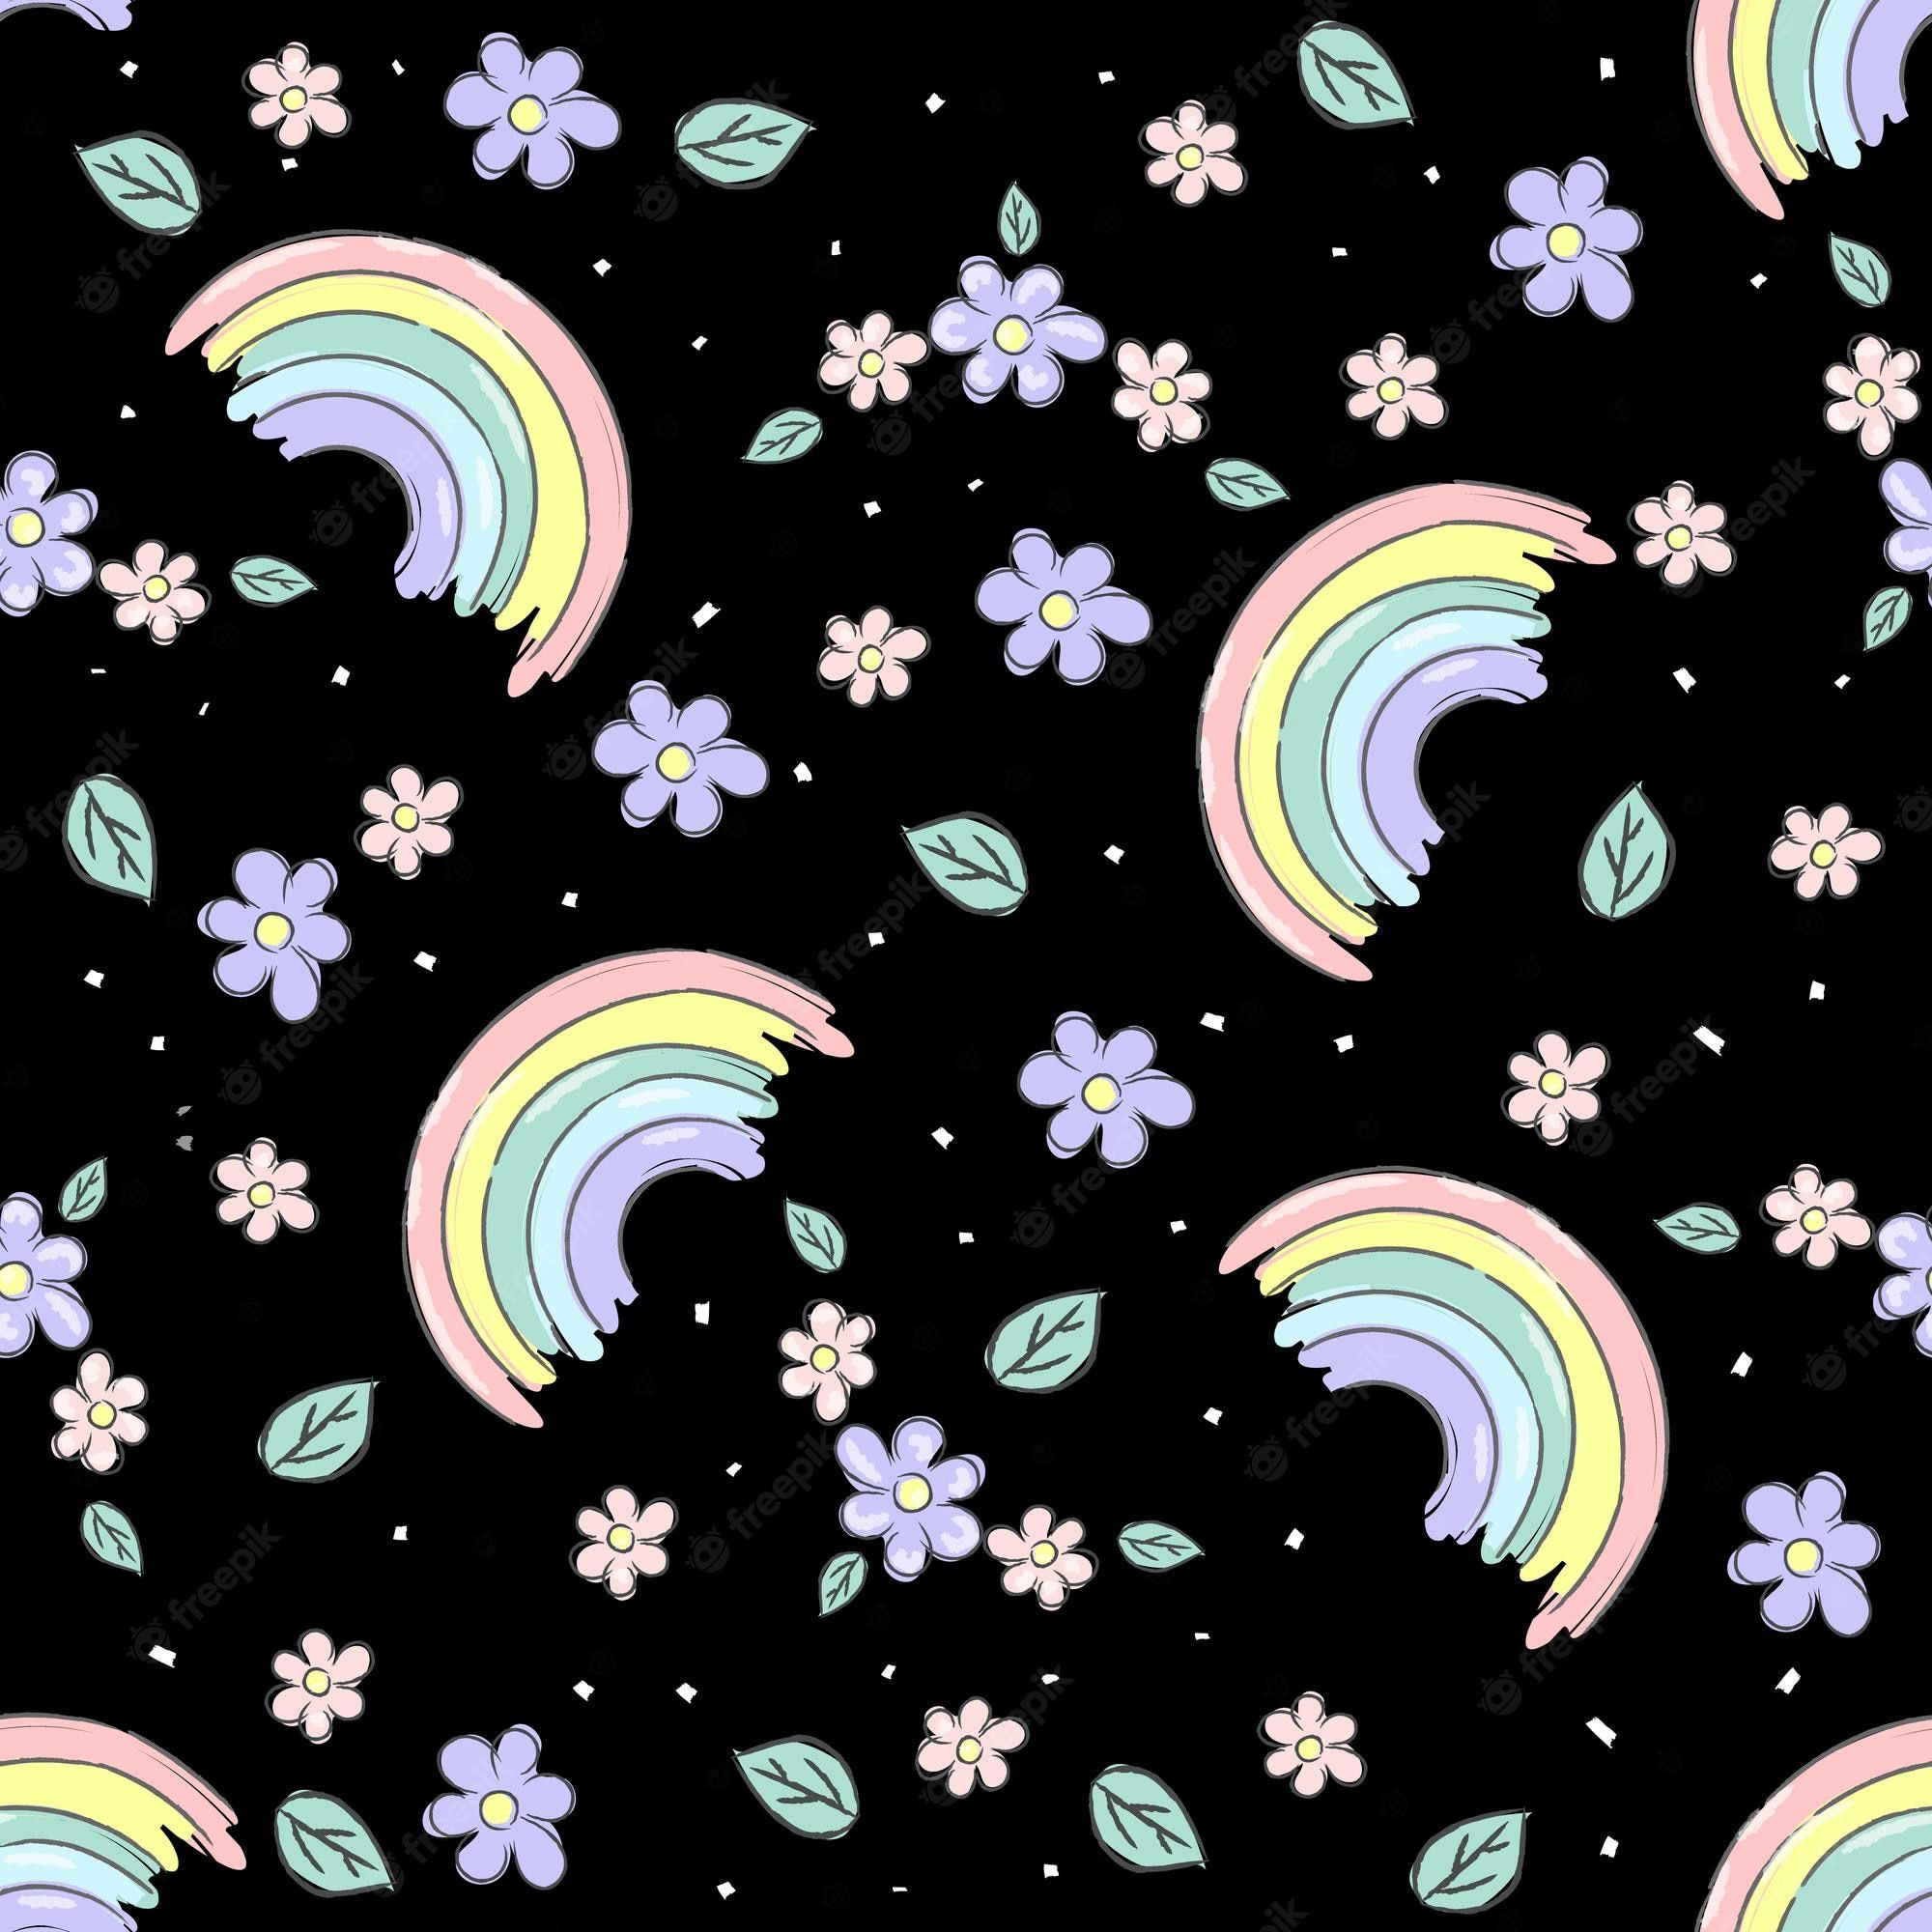 Premium Vector. Vector seamless pattern with cute rainbows and spring flowers on black background for kids baby texture for fabric textile wallpaper apparel wrapping